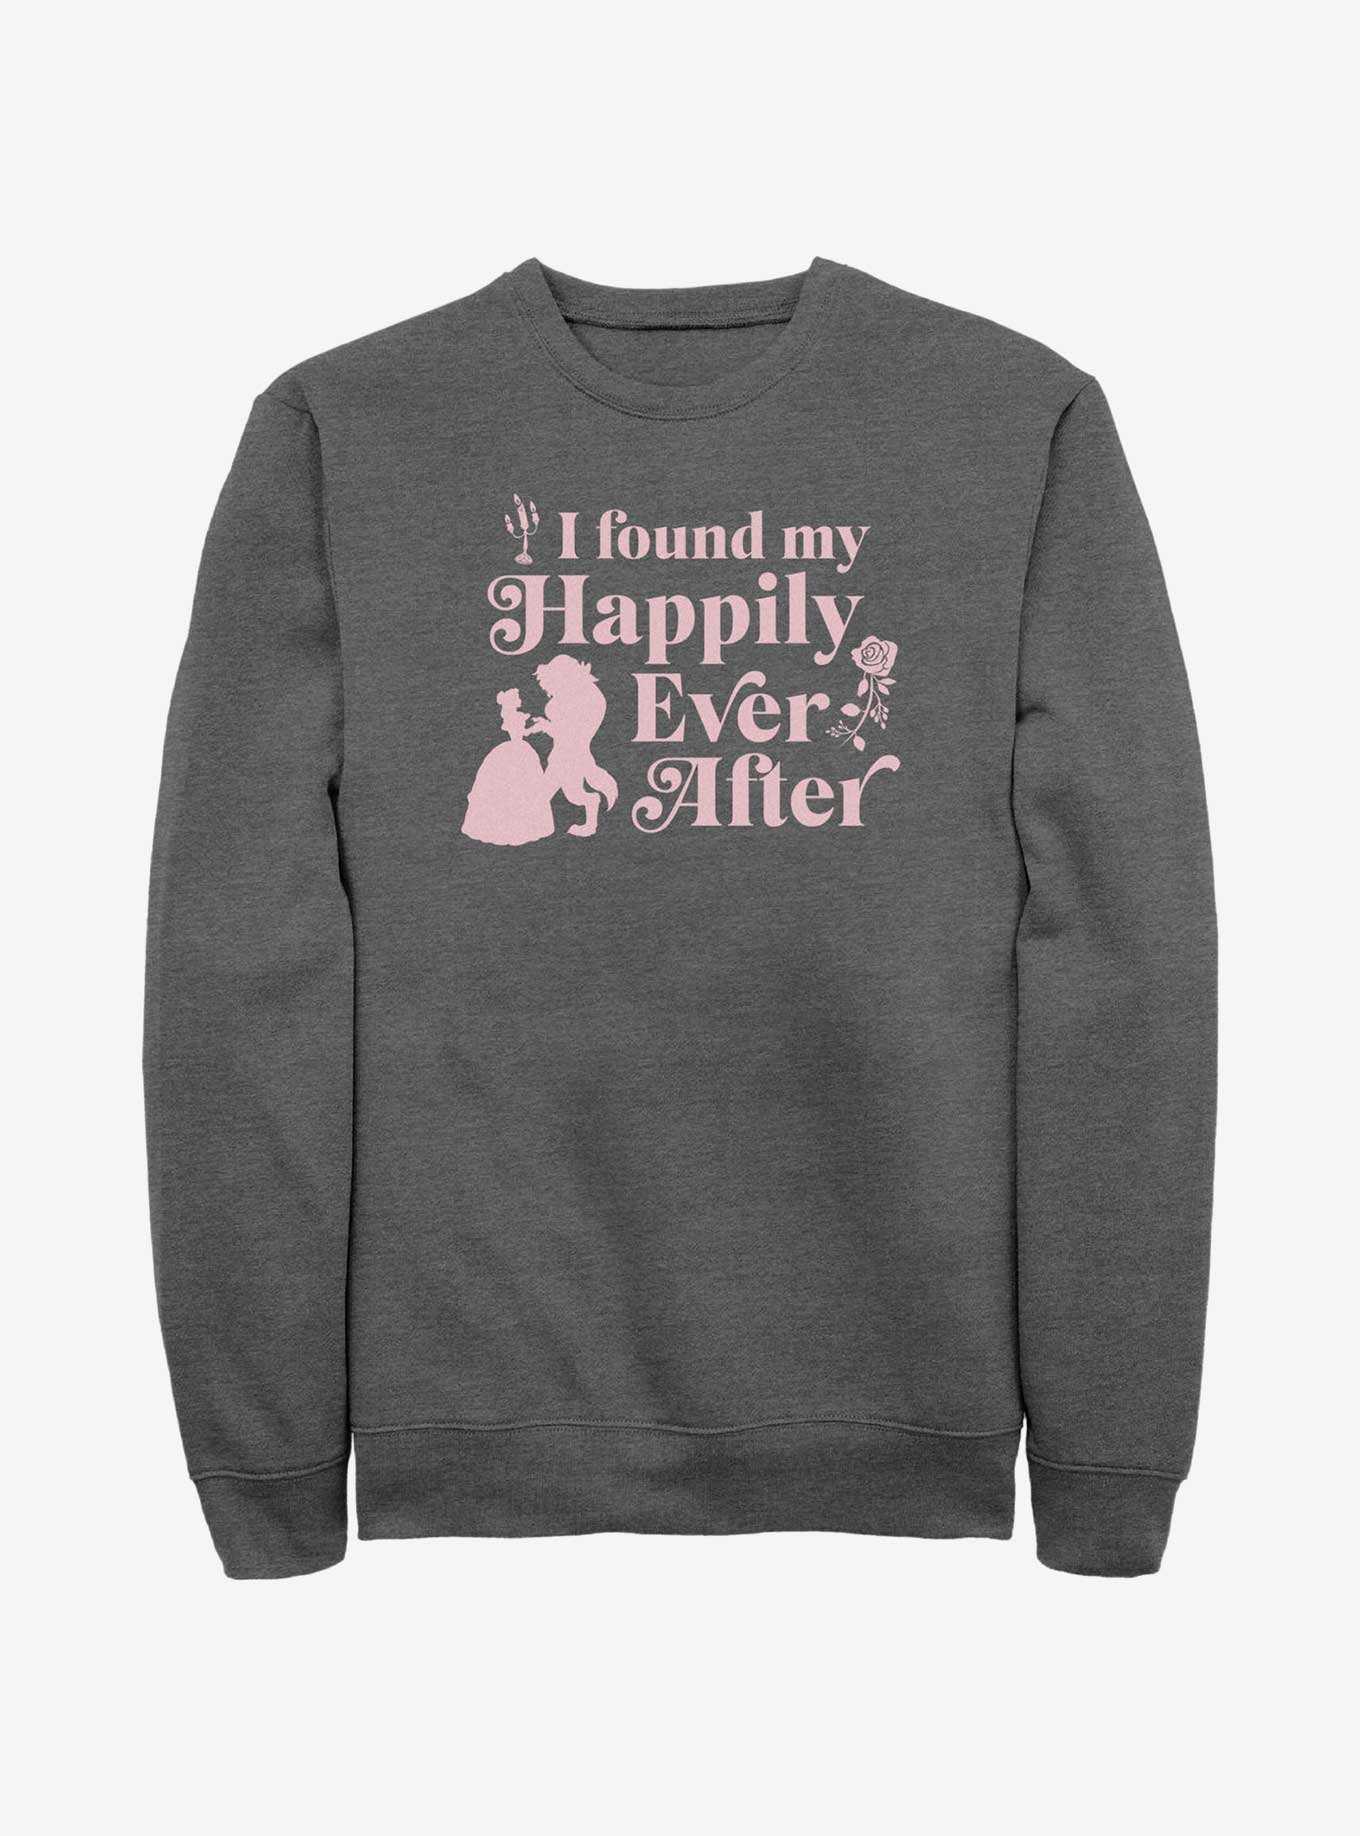 Disney Beauty and the Beast Found My Happily Ever After Sweatshirt, , hi-res